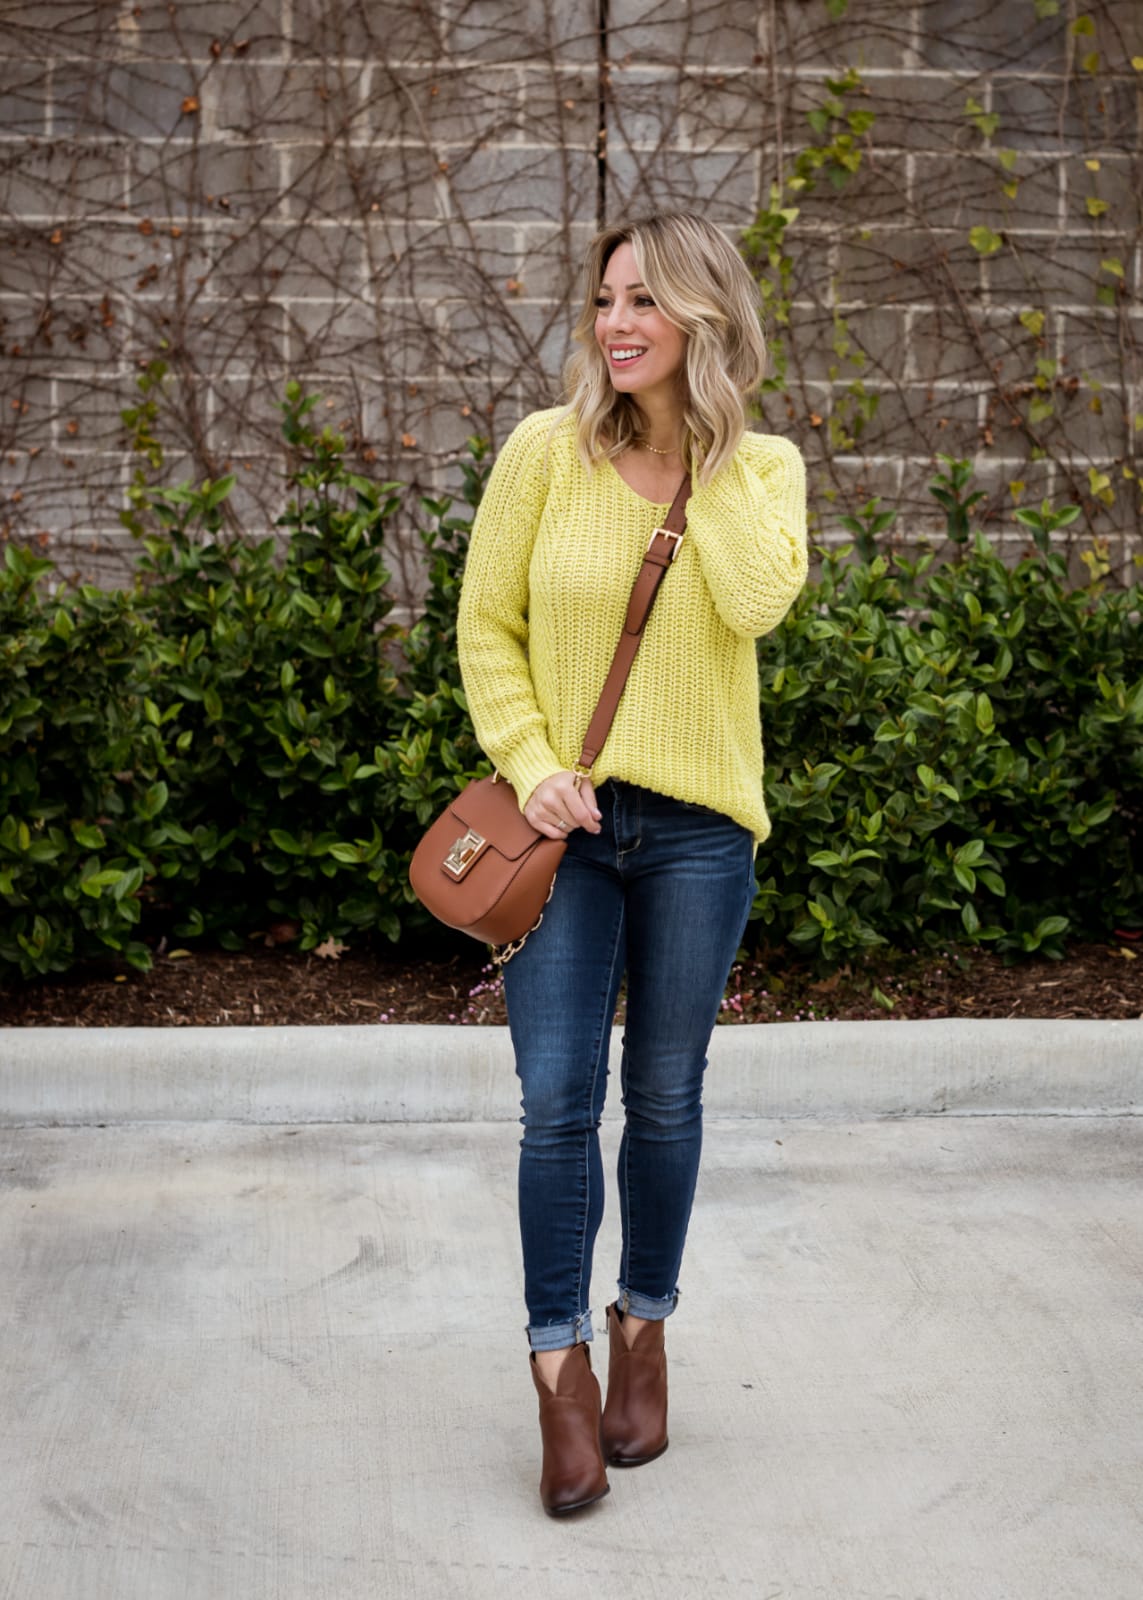 Cute winter outfit - yellow sweater and jeans with brown booties